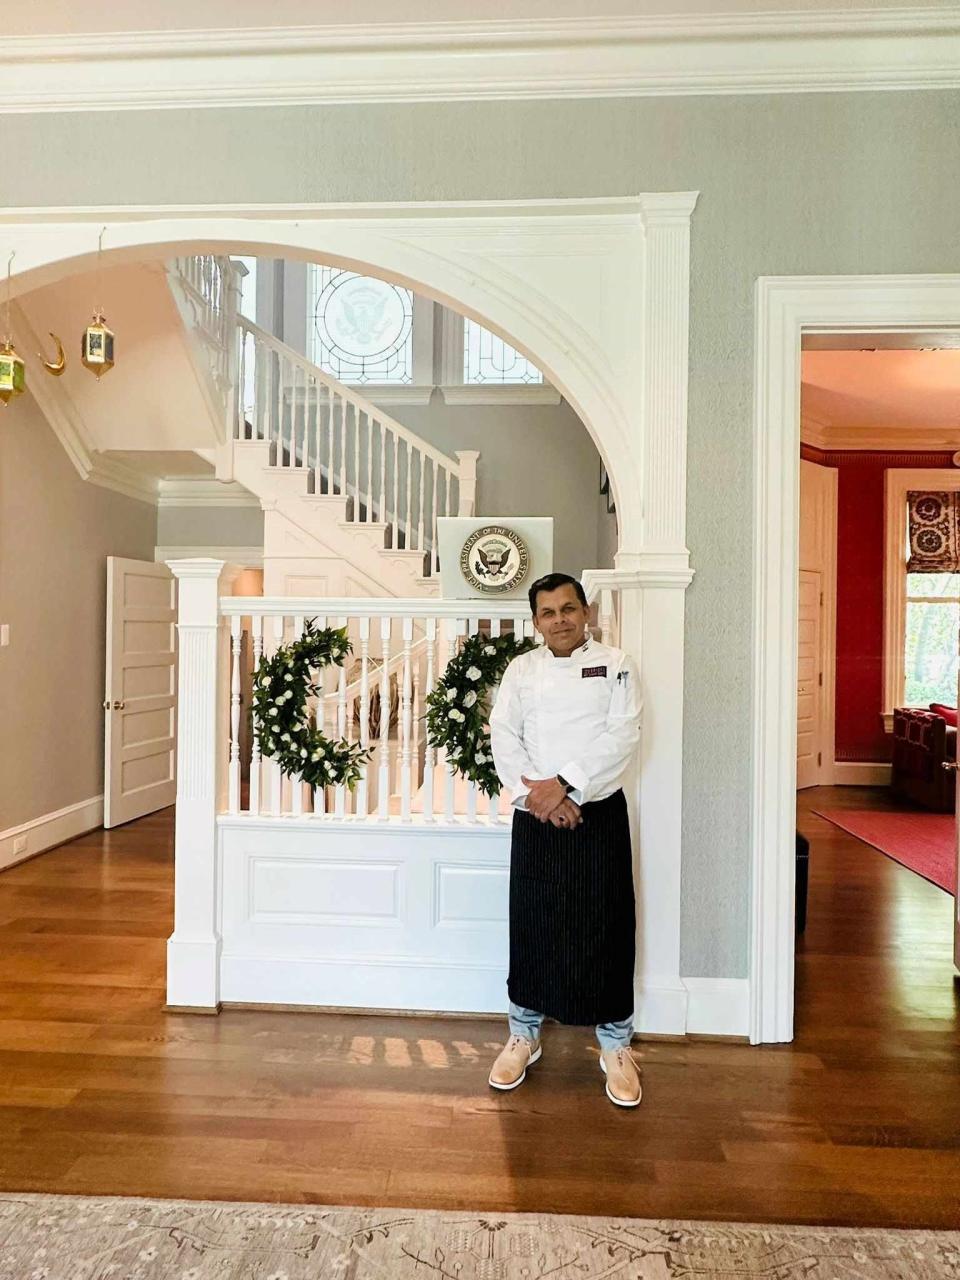 Chef Asif Syed at United States Naval Observatory, the vice president's official office and residence.